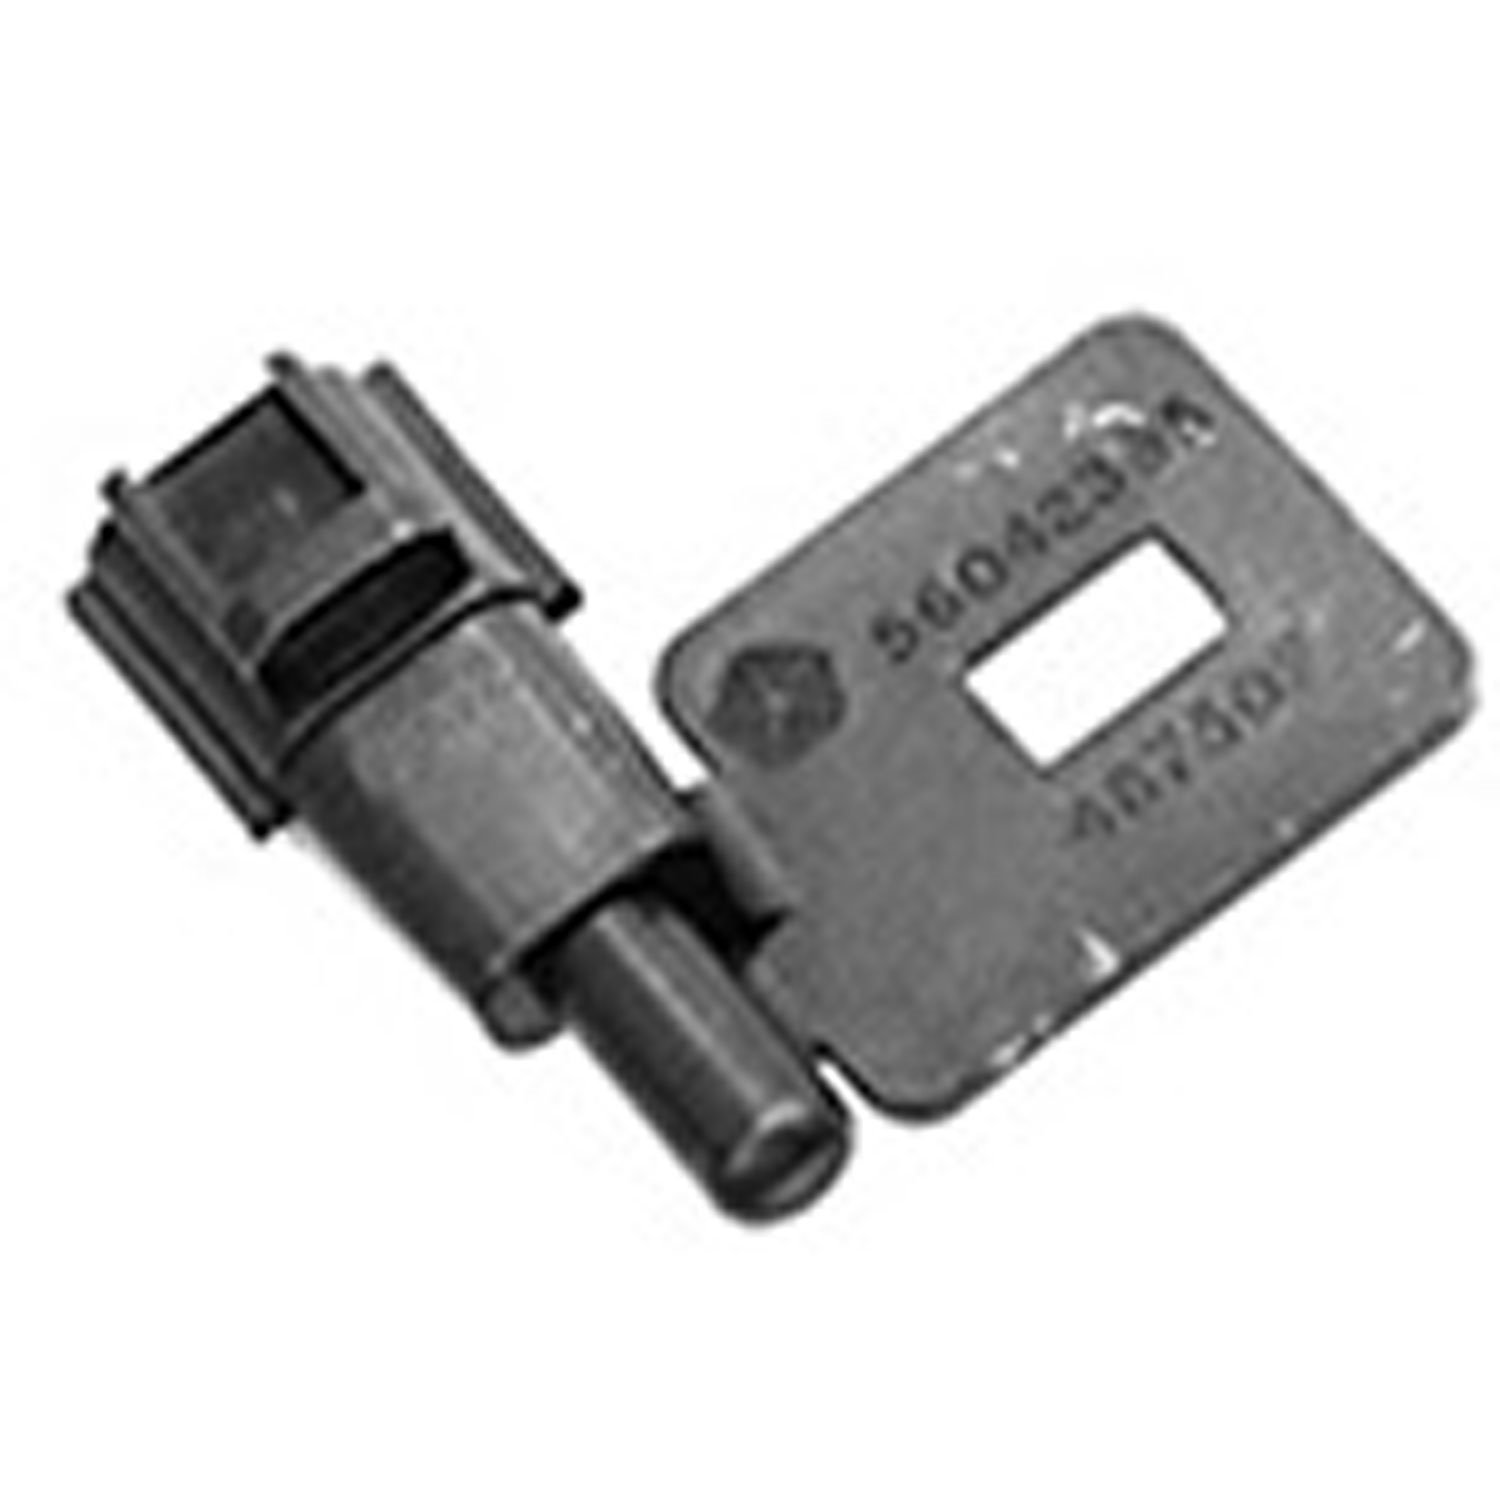 Replacement ambient temperature sensor from Omix-ADA, Fits 99-11 Jeep Grand Cherokees and 06-10 Commanders.